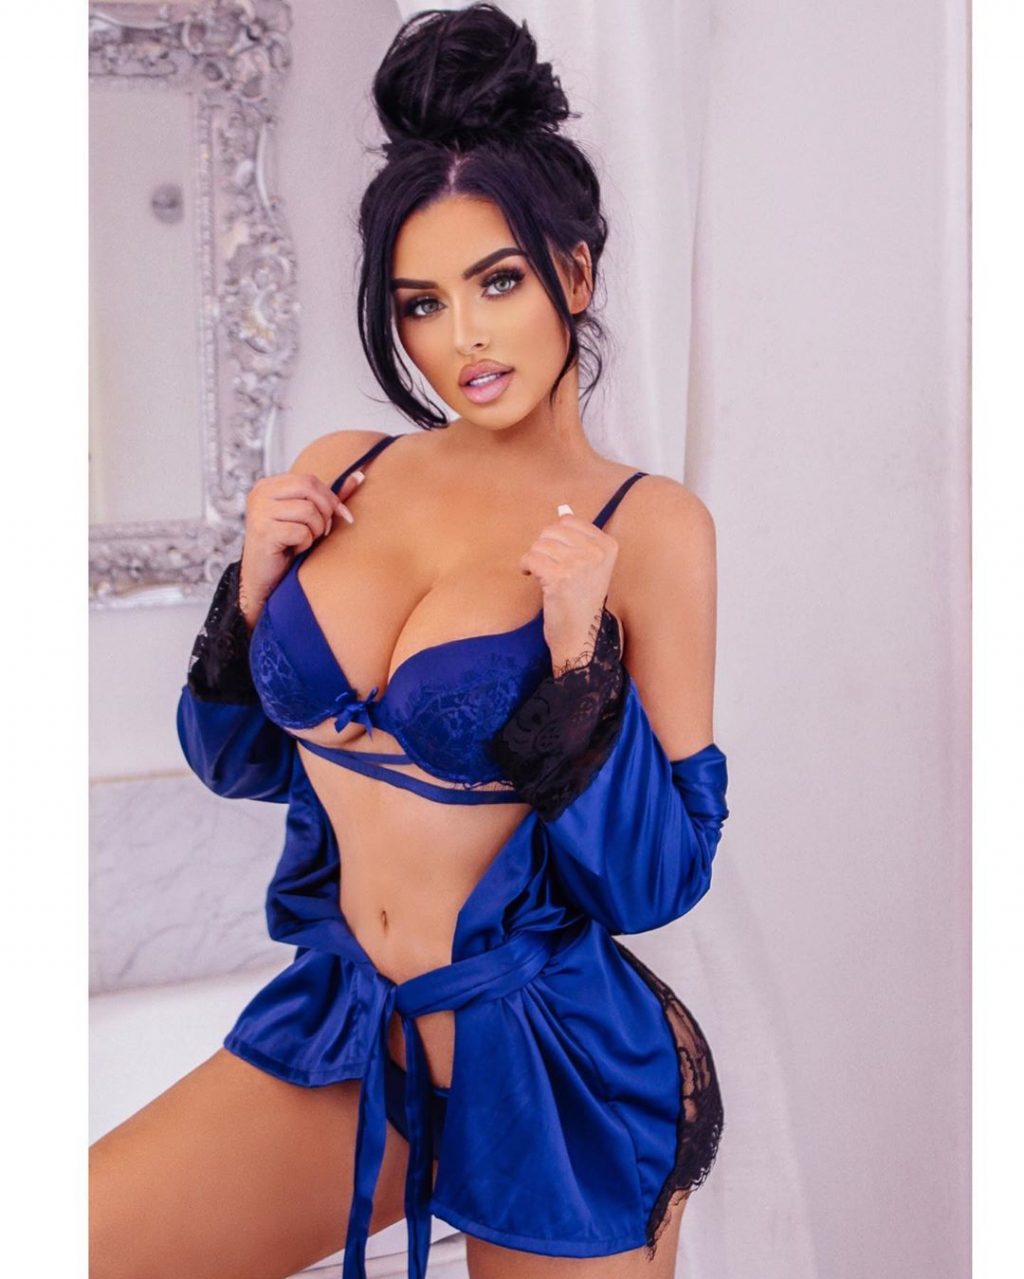 sexy private pics photos nude naked Instagram glamour celebrity busty Abigail Ratchford 